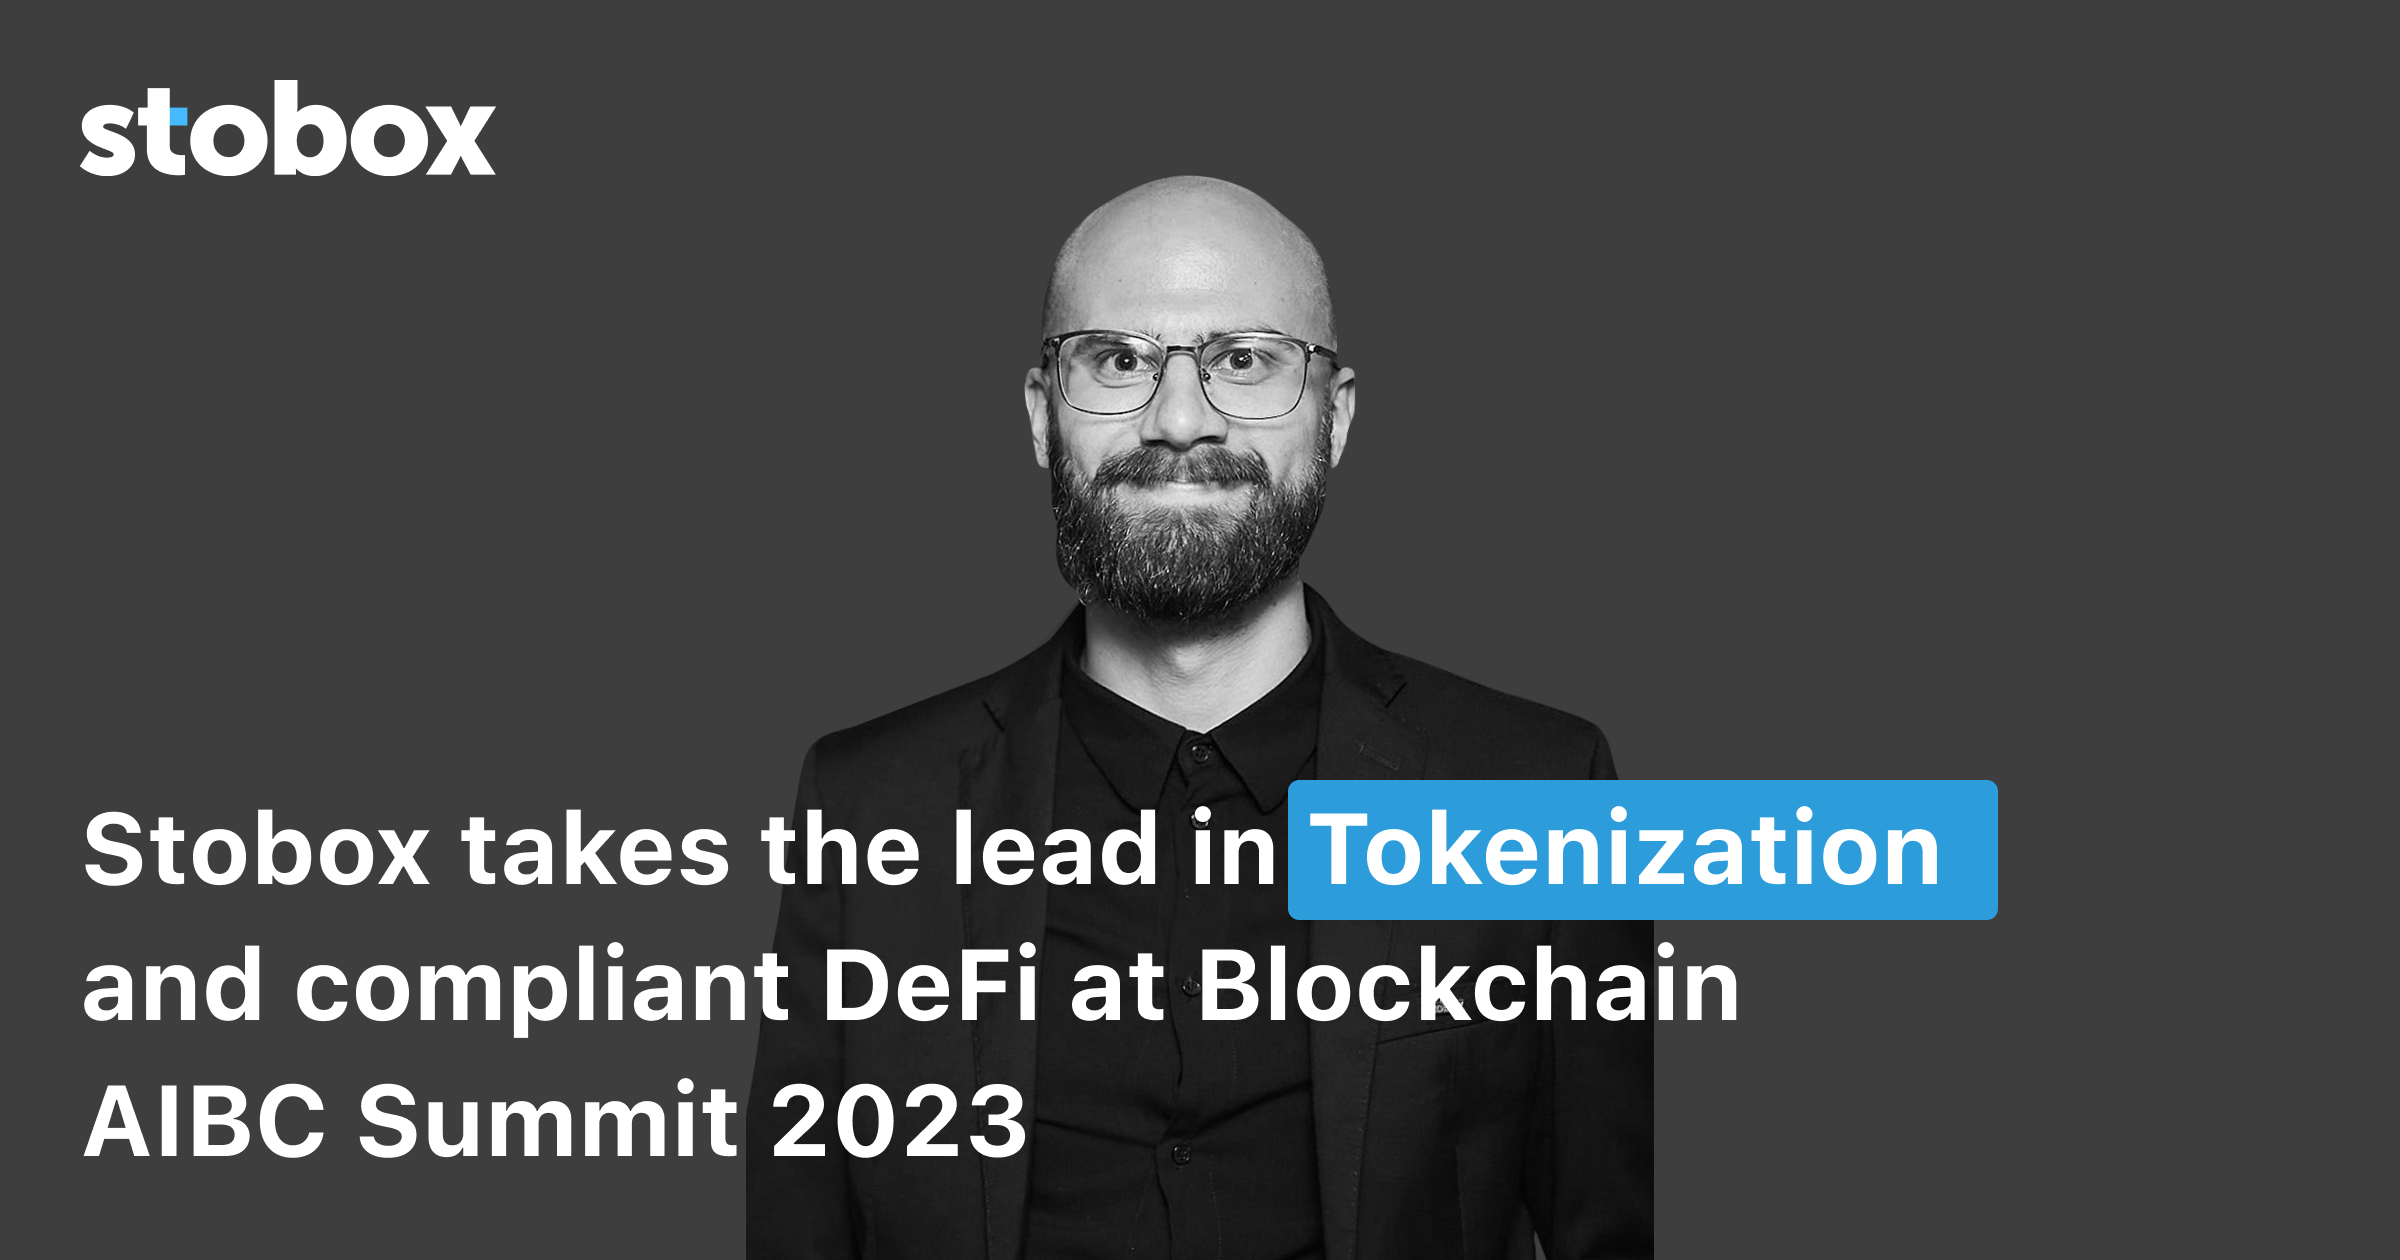 Stobox Technologies Takes the Lead in Tokenization and Compliant DeFi at Blockchain AIBC Summit 2023